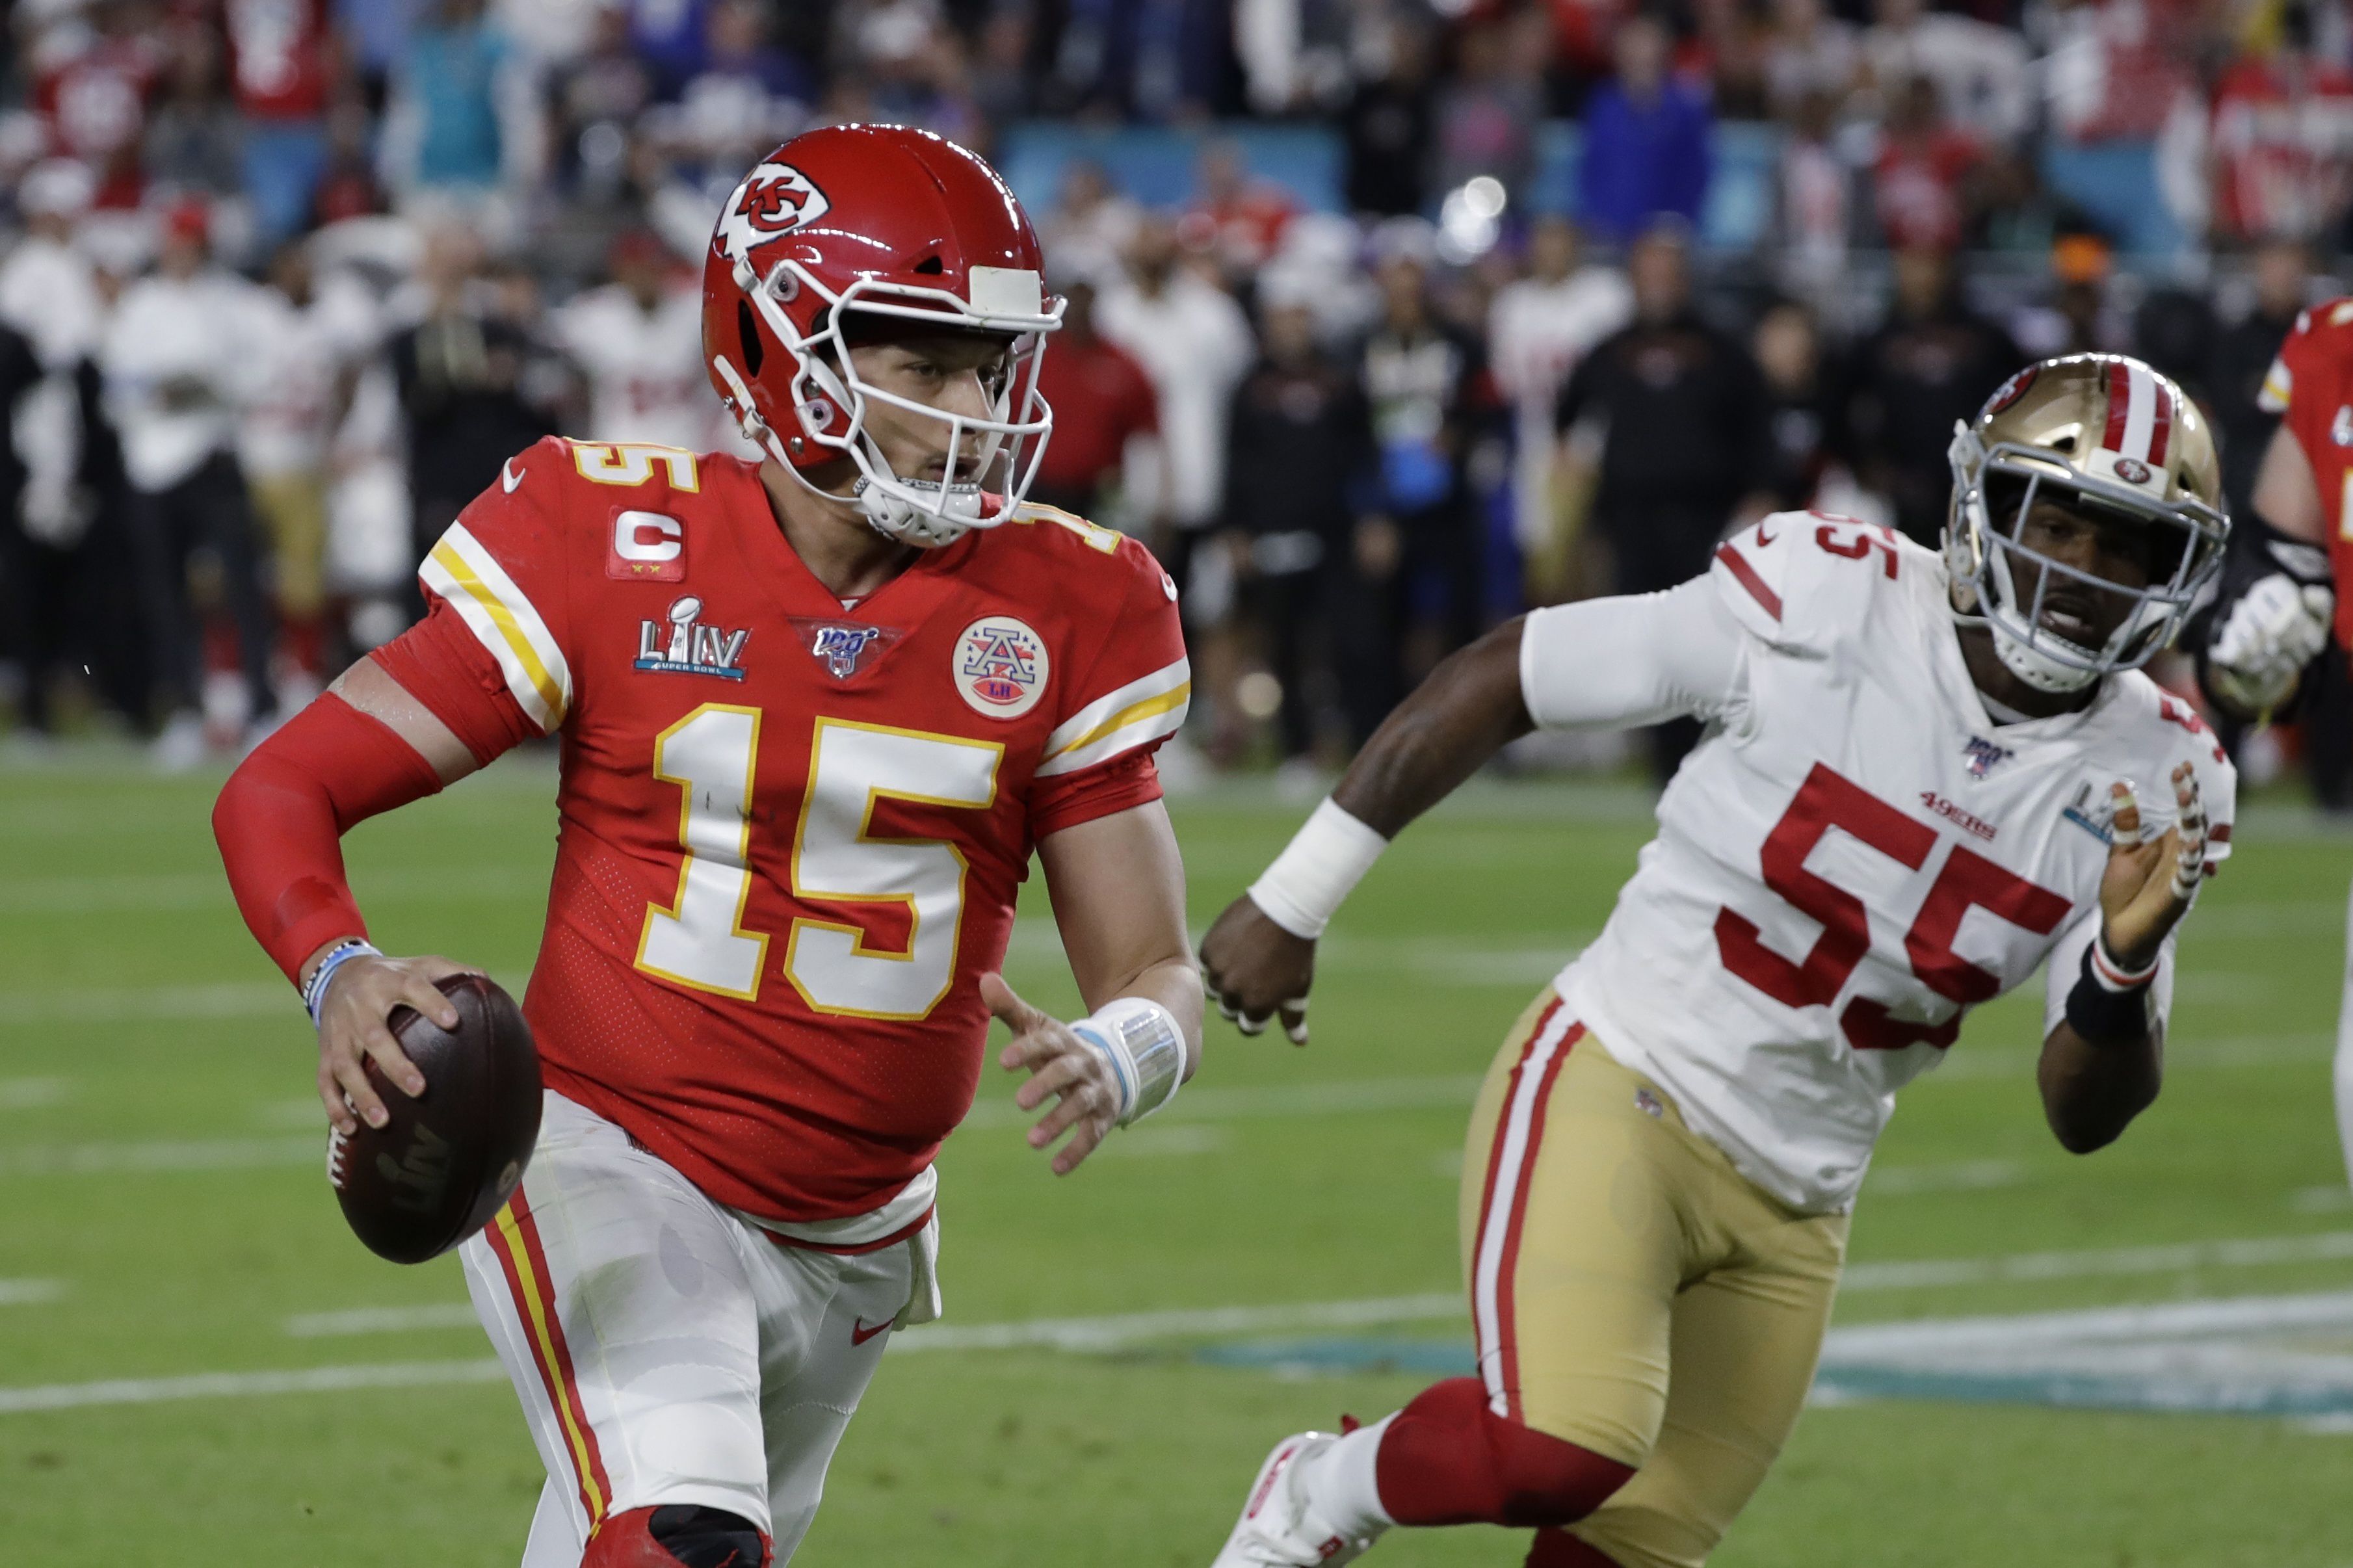 LIVE BLOG: Chiefs top 49ers, 31-20, in Super Bowl LIV